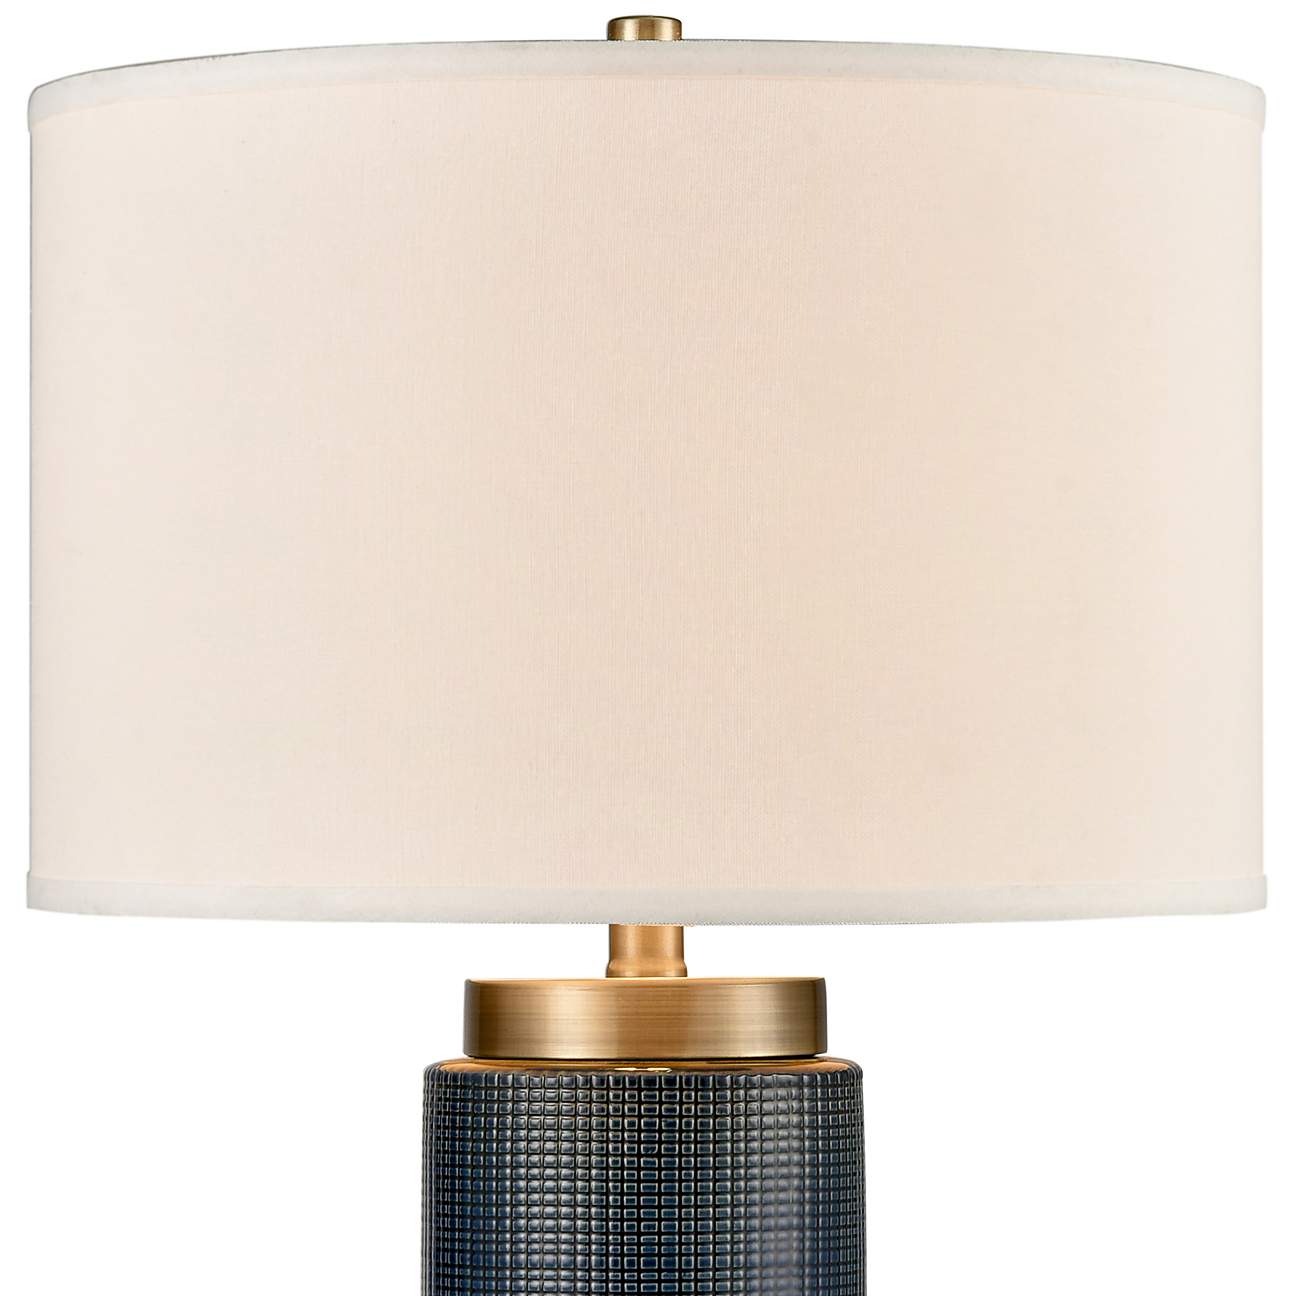 Dimond Concettas Navy Blue Ceramic Cylinder Table lamp - #445R0 | Lamps ...